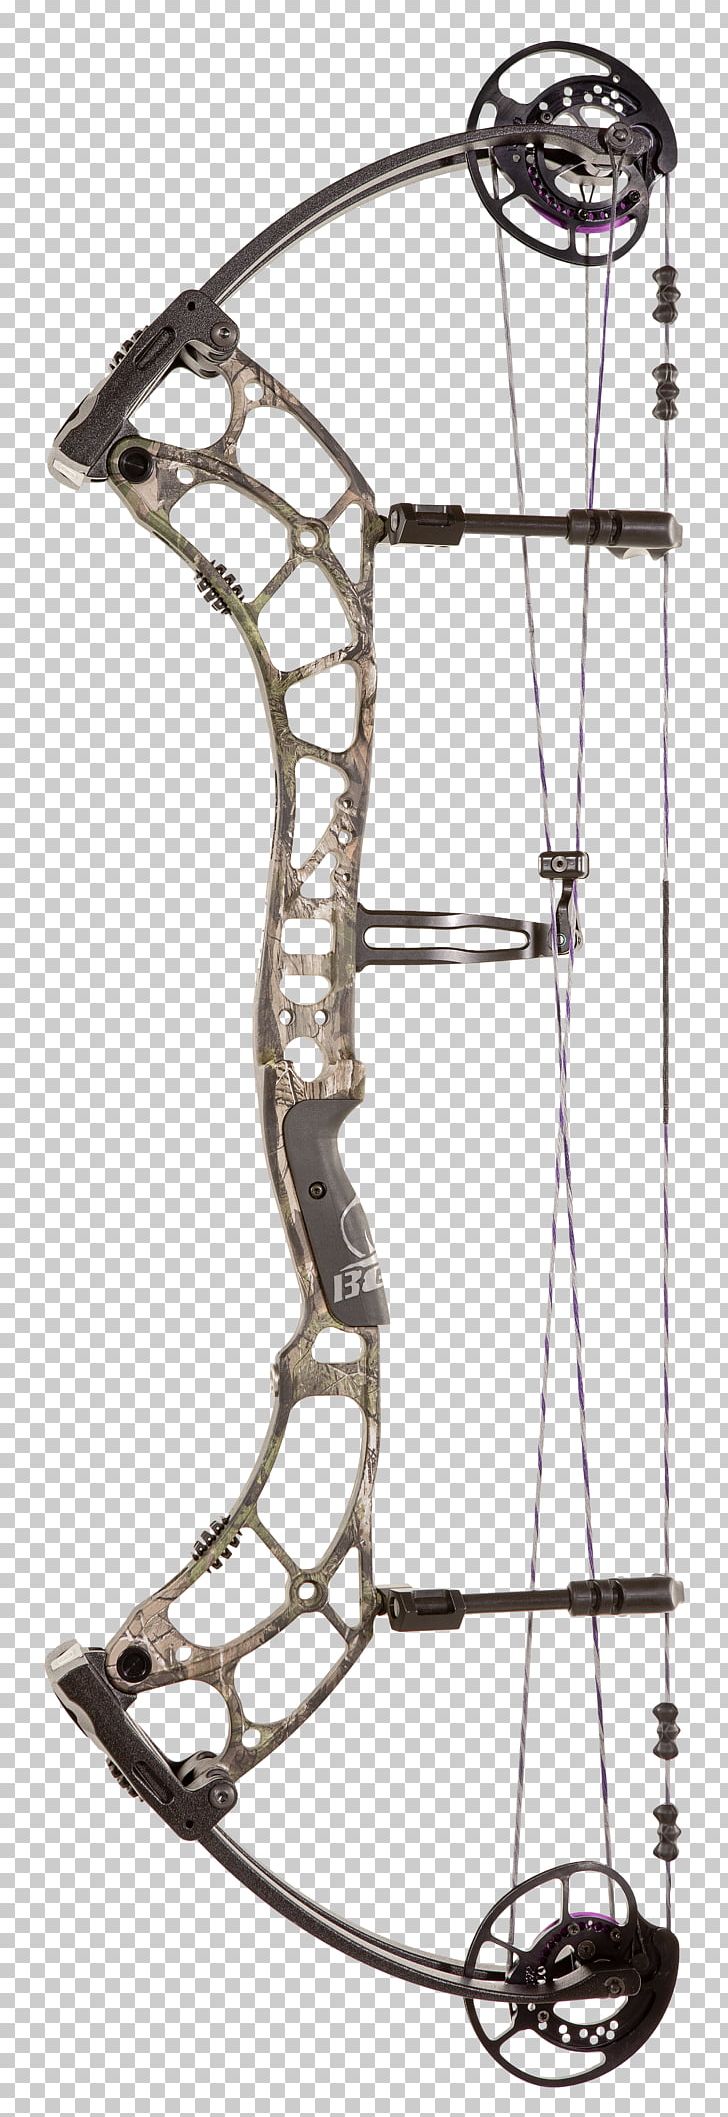 Compound Bows Hunting Bear Archery Bow And Arrow PNG, Clipart, Animals, Archery, Bear, Bear Archery, Bear Escape Free PNG Download